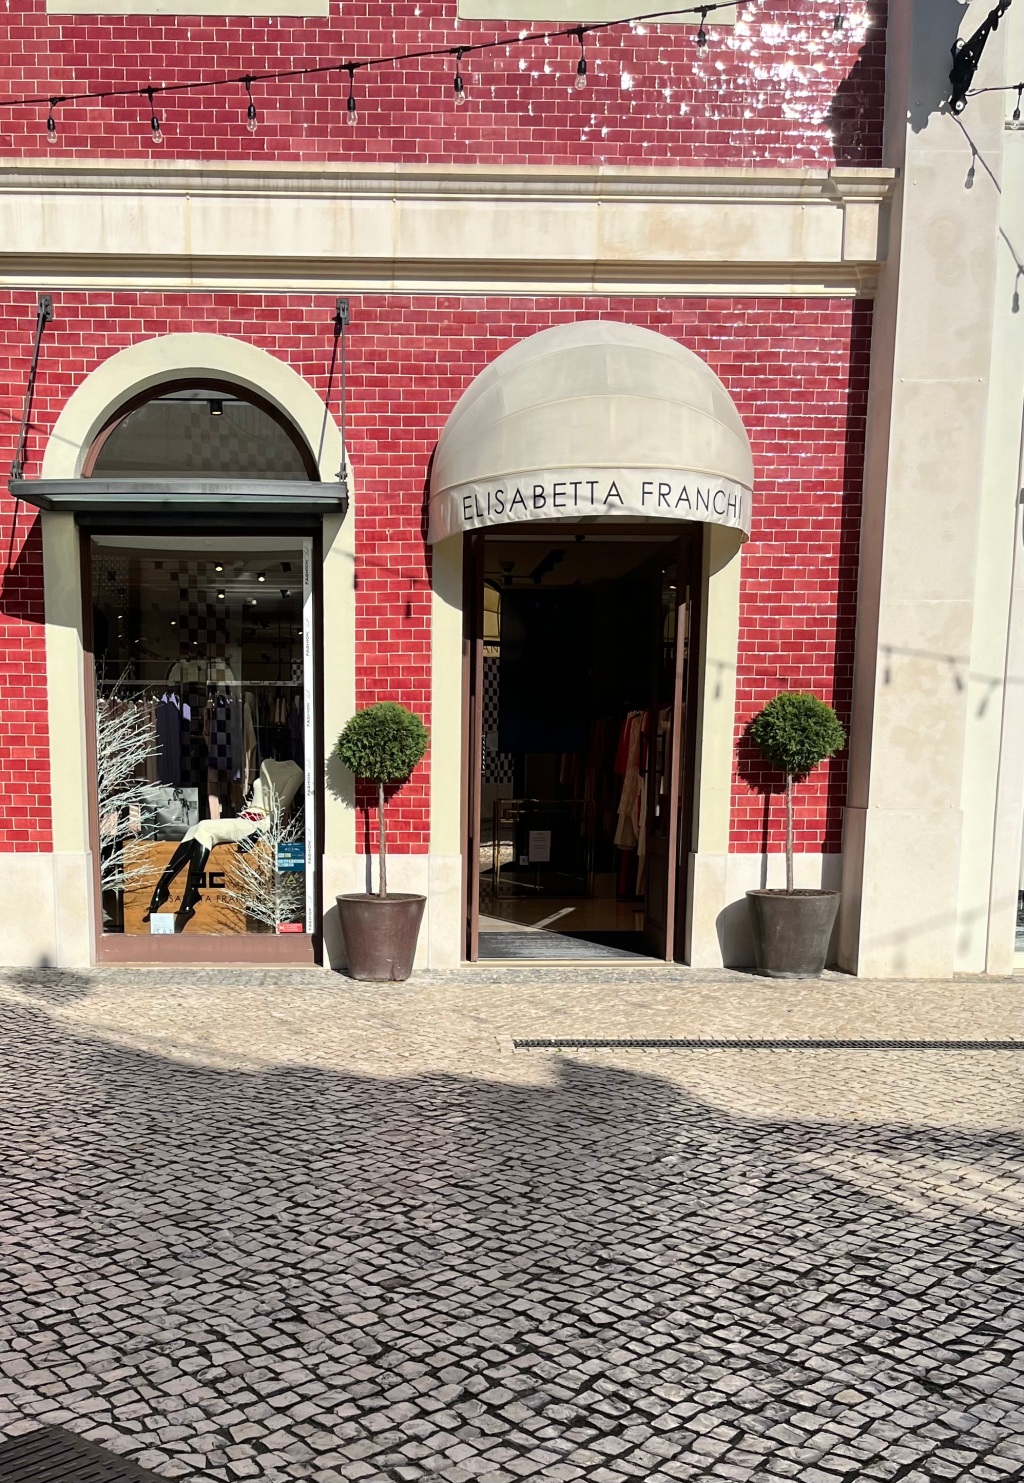 What we need to know about the brand Elisabetta Franchi